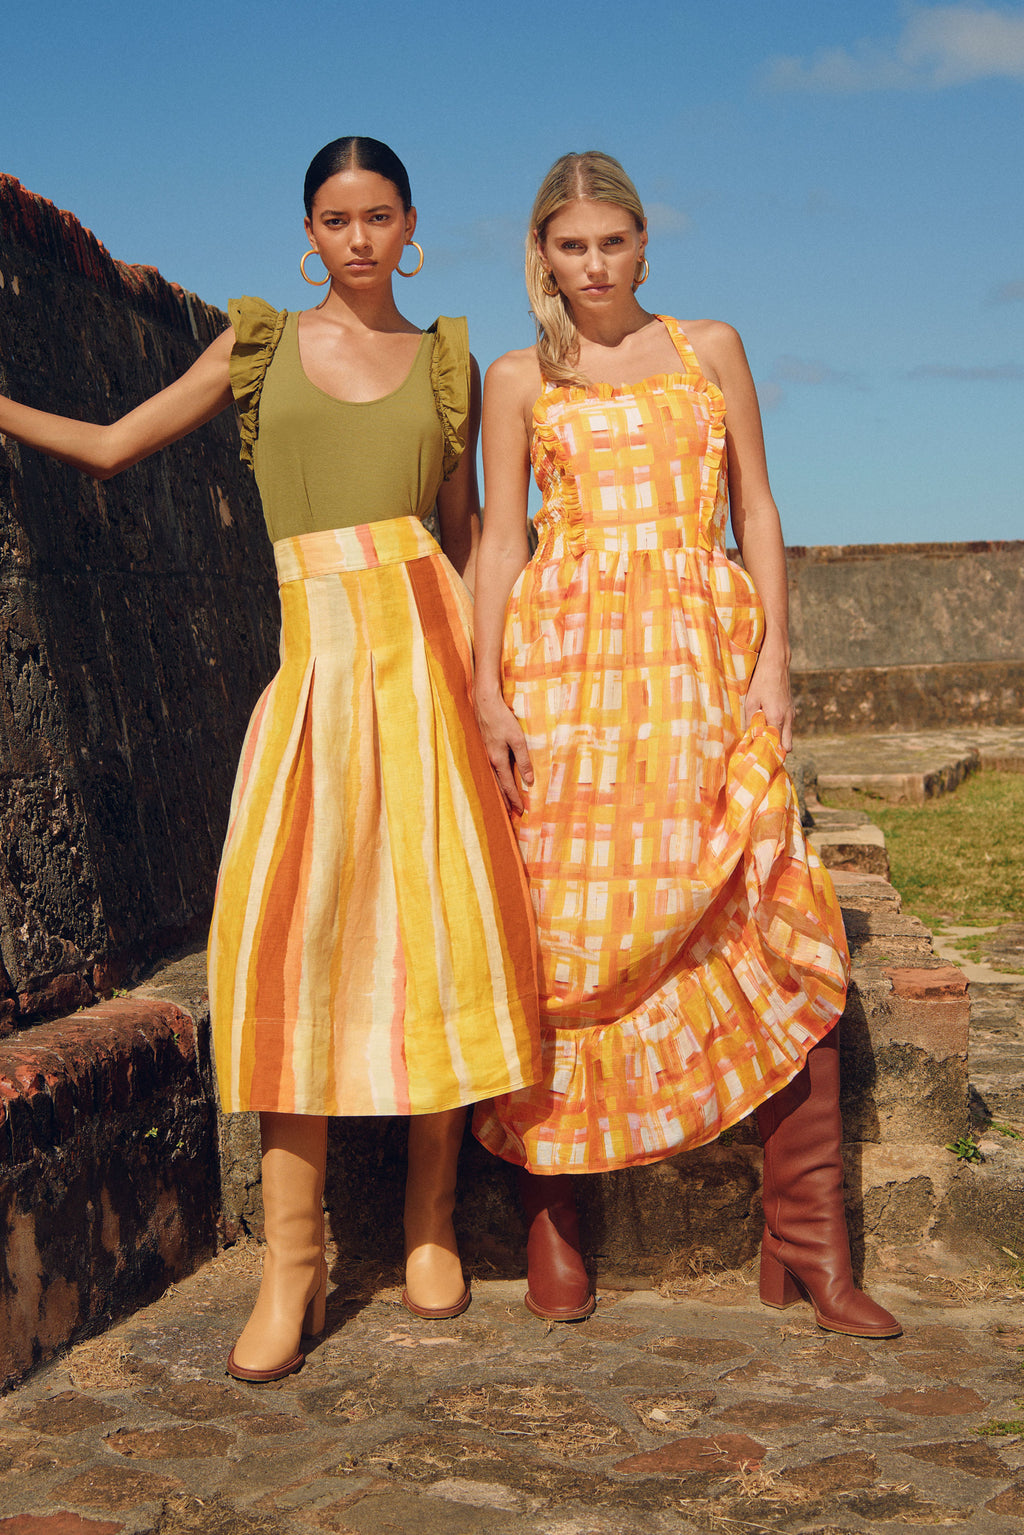 Orange and yellow checkered printed sleeveless dress that has a square neckline and is cinched at the waist